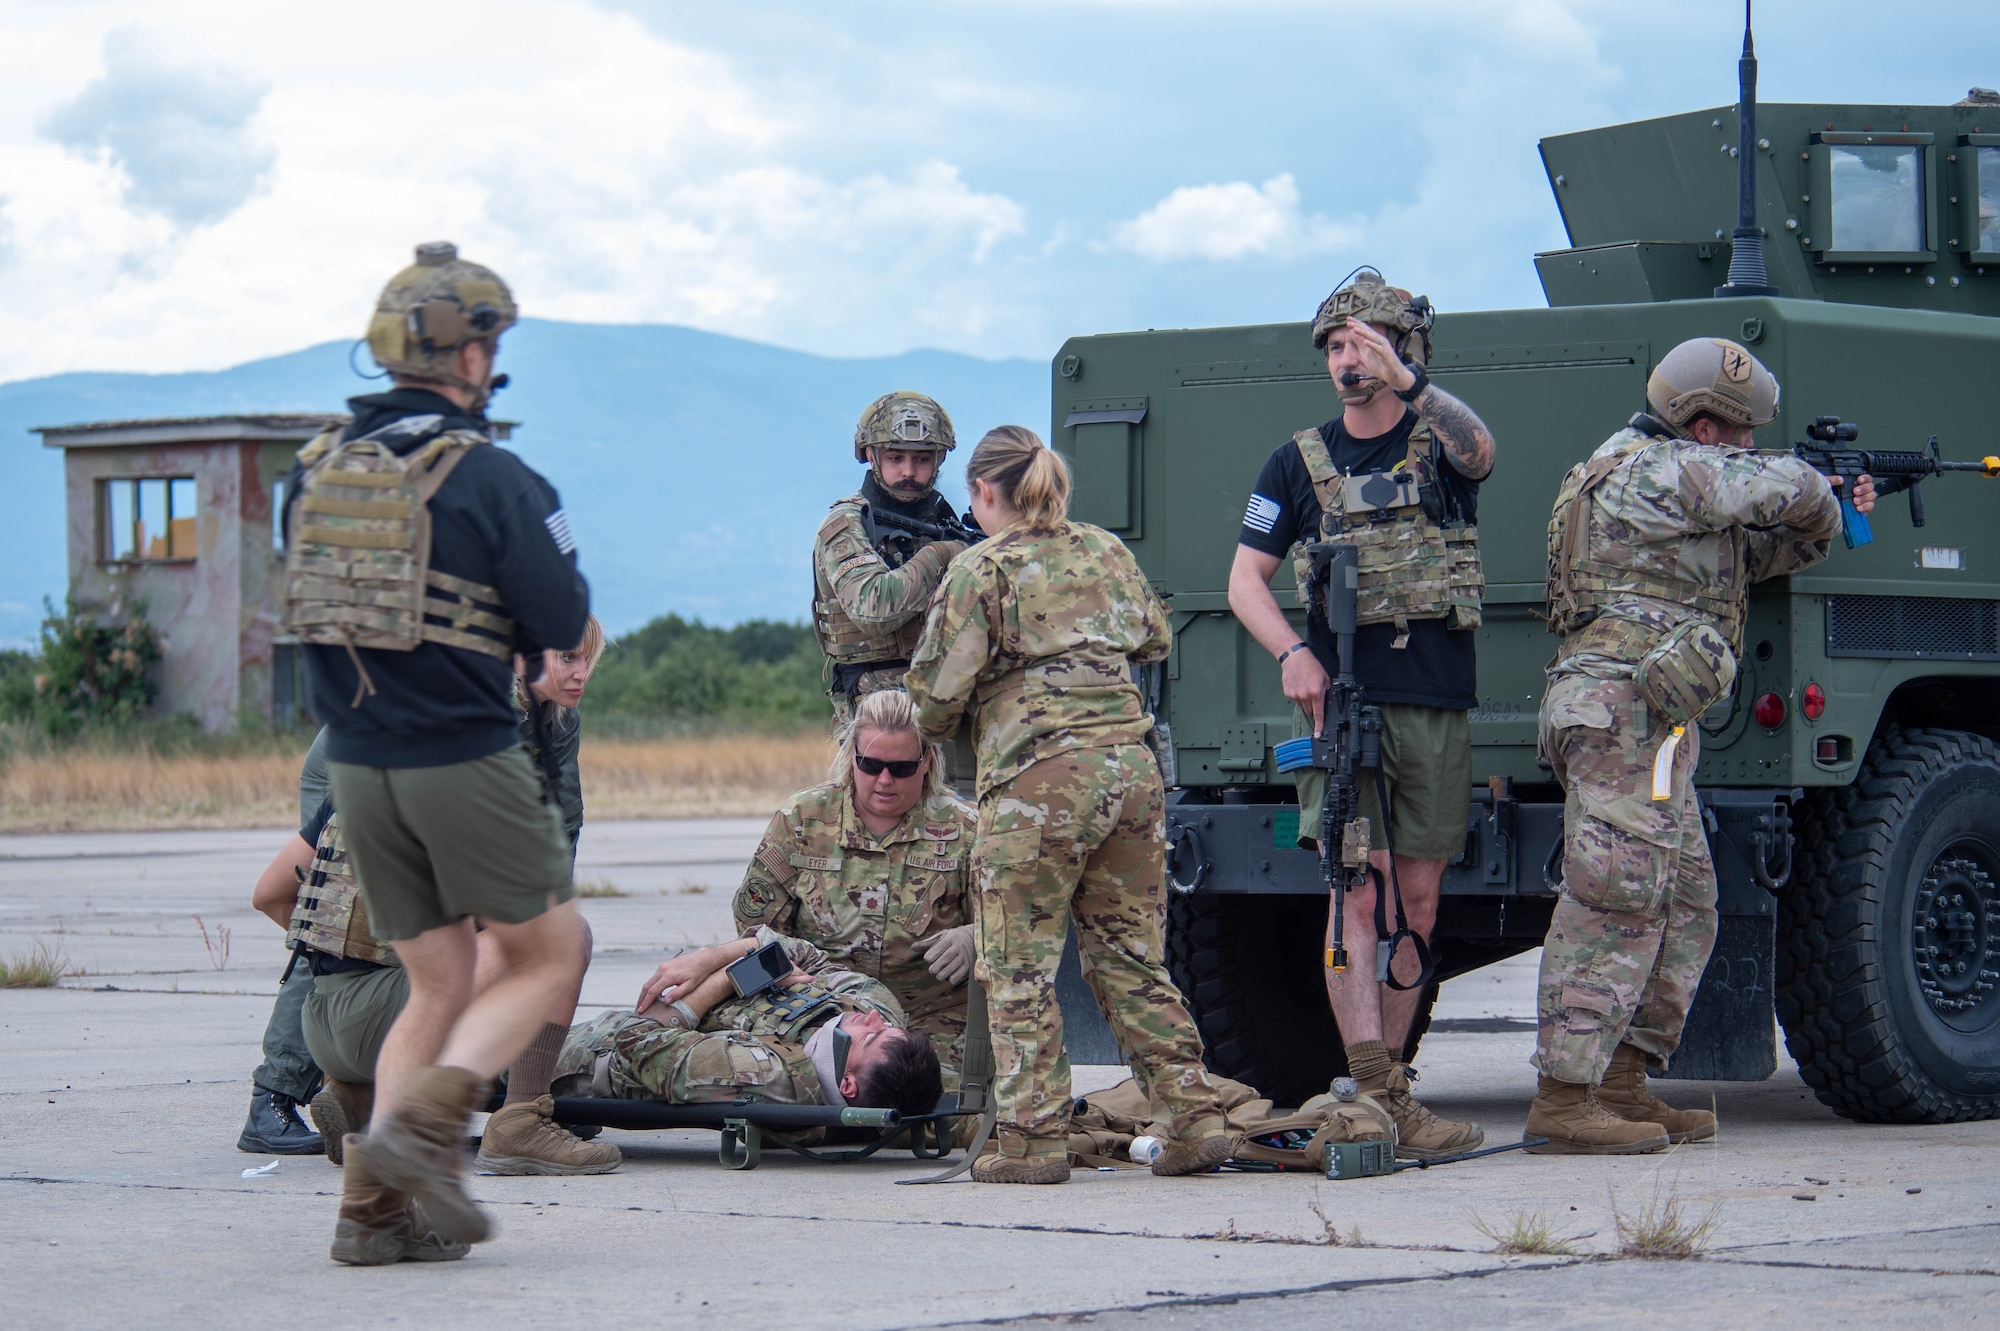 U.S. Air Force Airmen from the 86th Aeromedical Evacuation Squadron and 435th Contingency Response Squadron team up in a joint exercise during Thracian Summer 2023 at Cheshnegirovo Air Base, Bulgaria, Aug. 10, 2023.